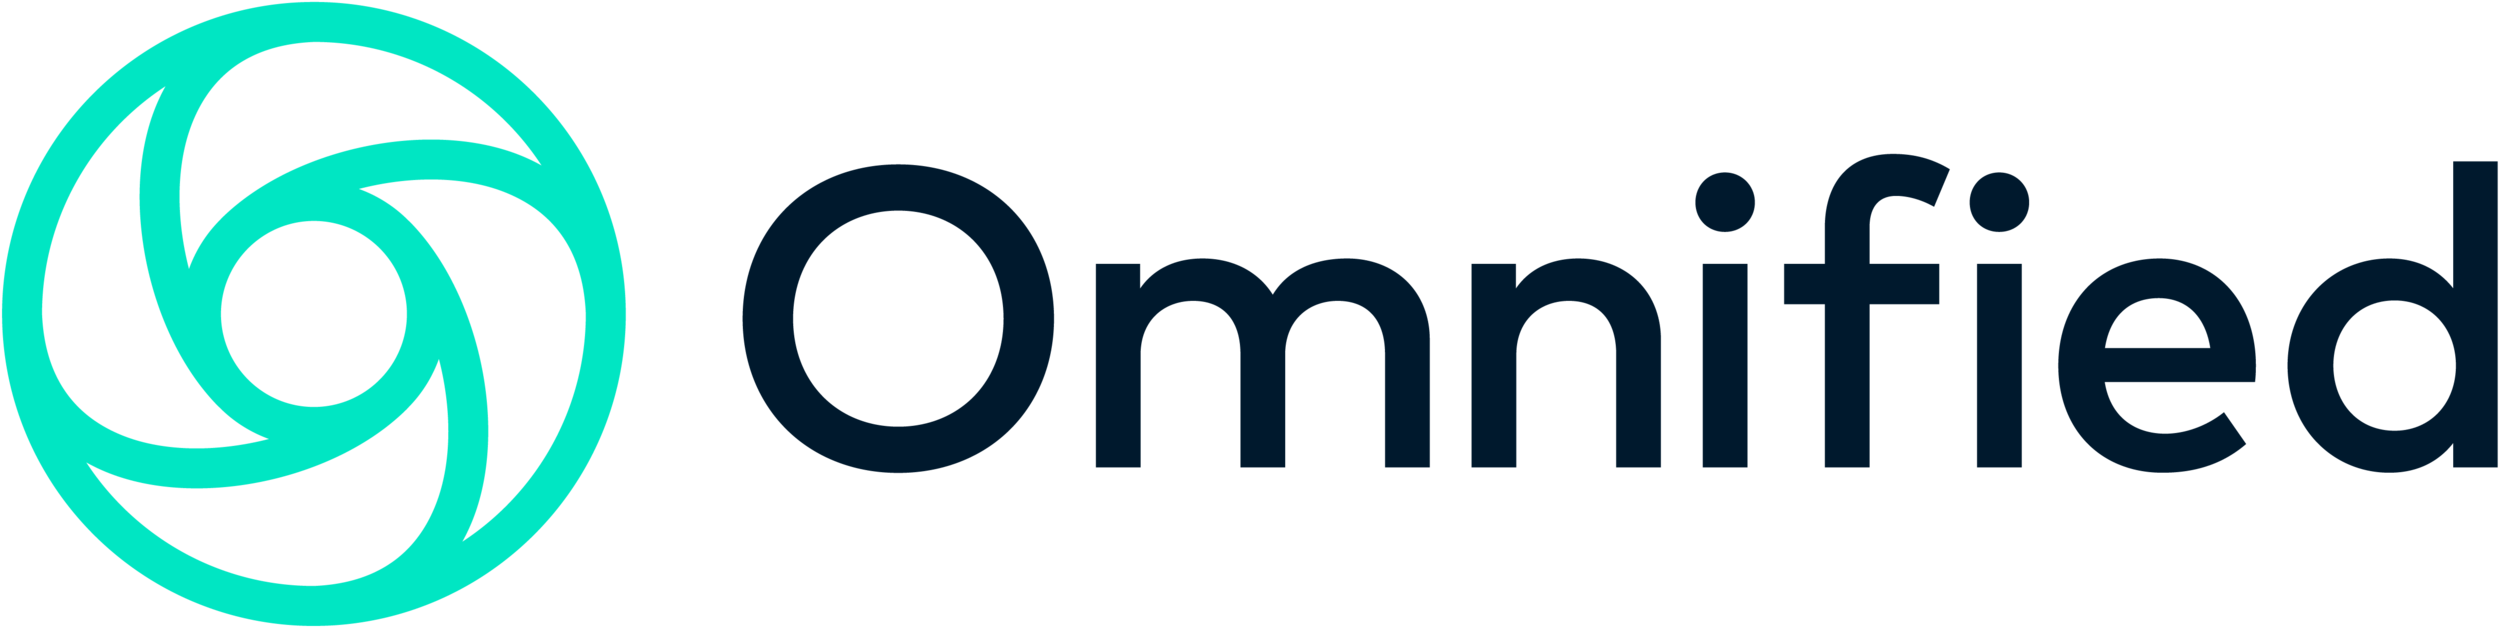 Omnified - Omnichannel Retail Solutions